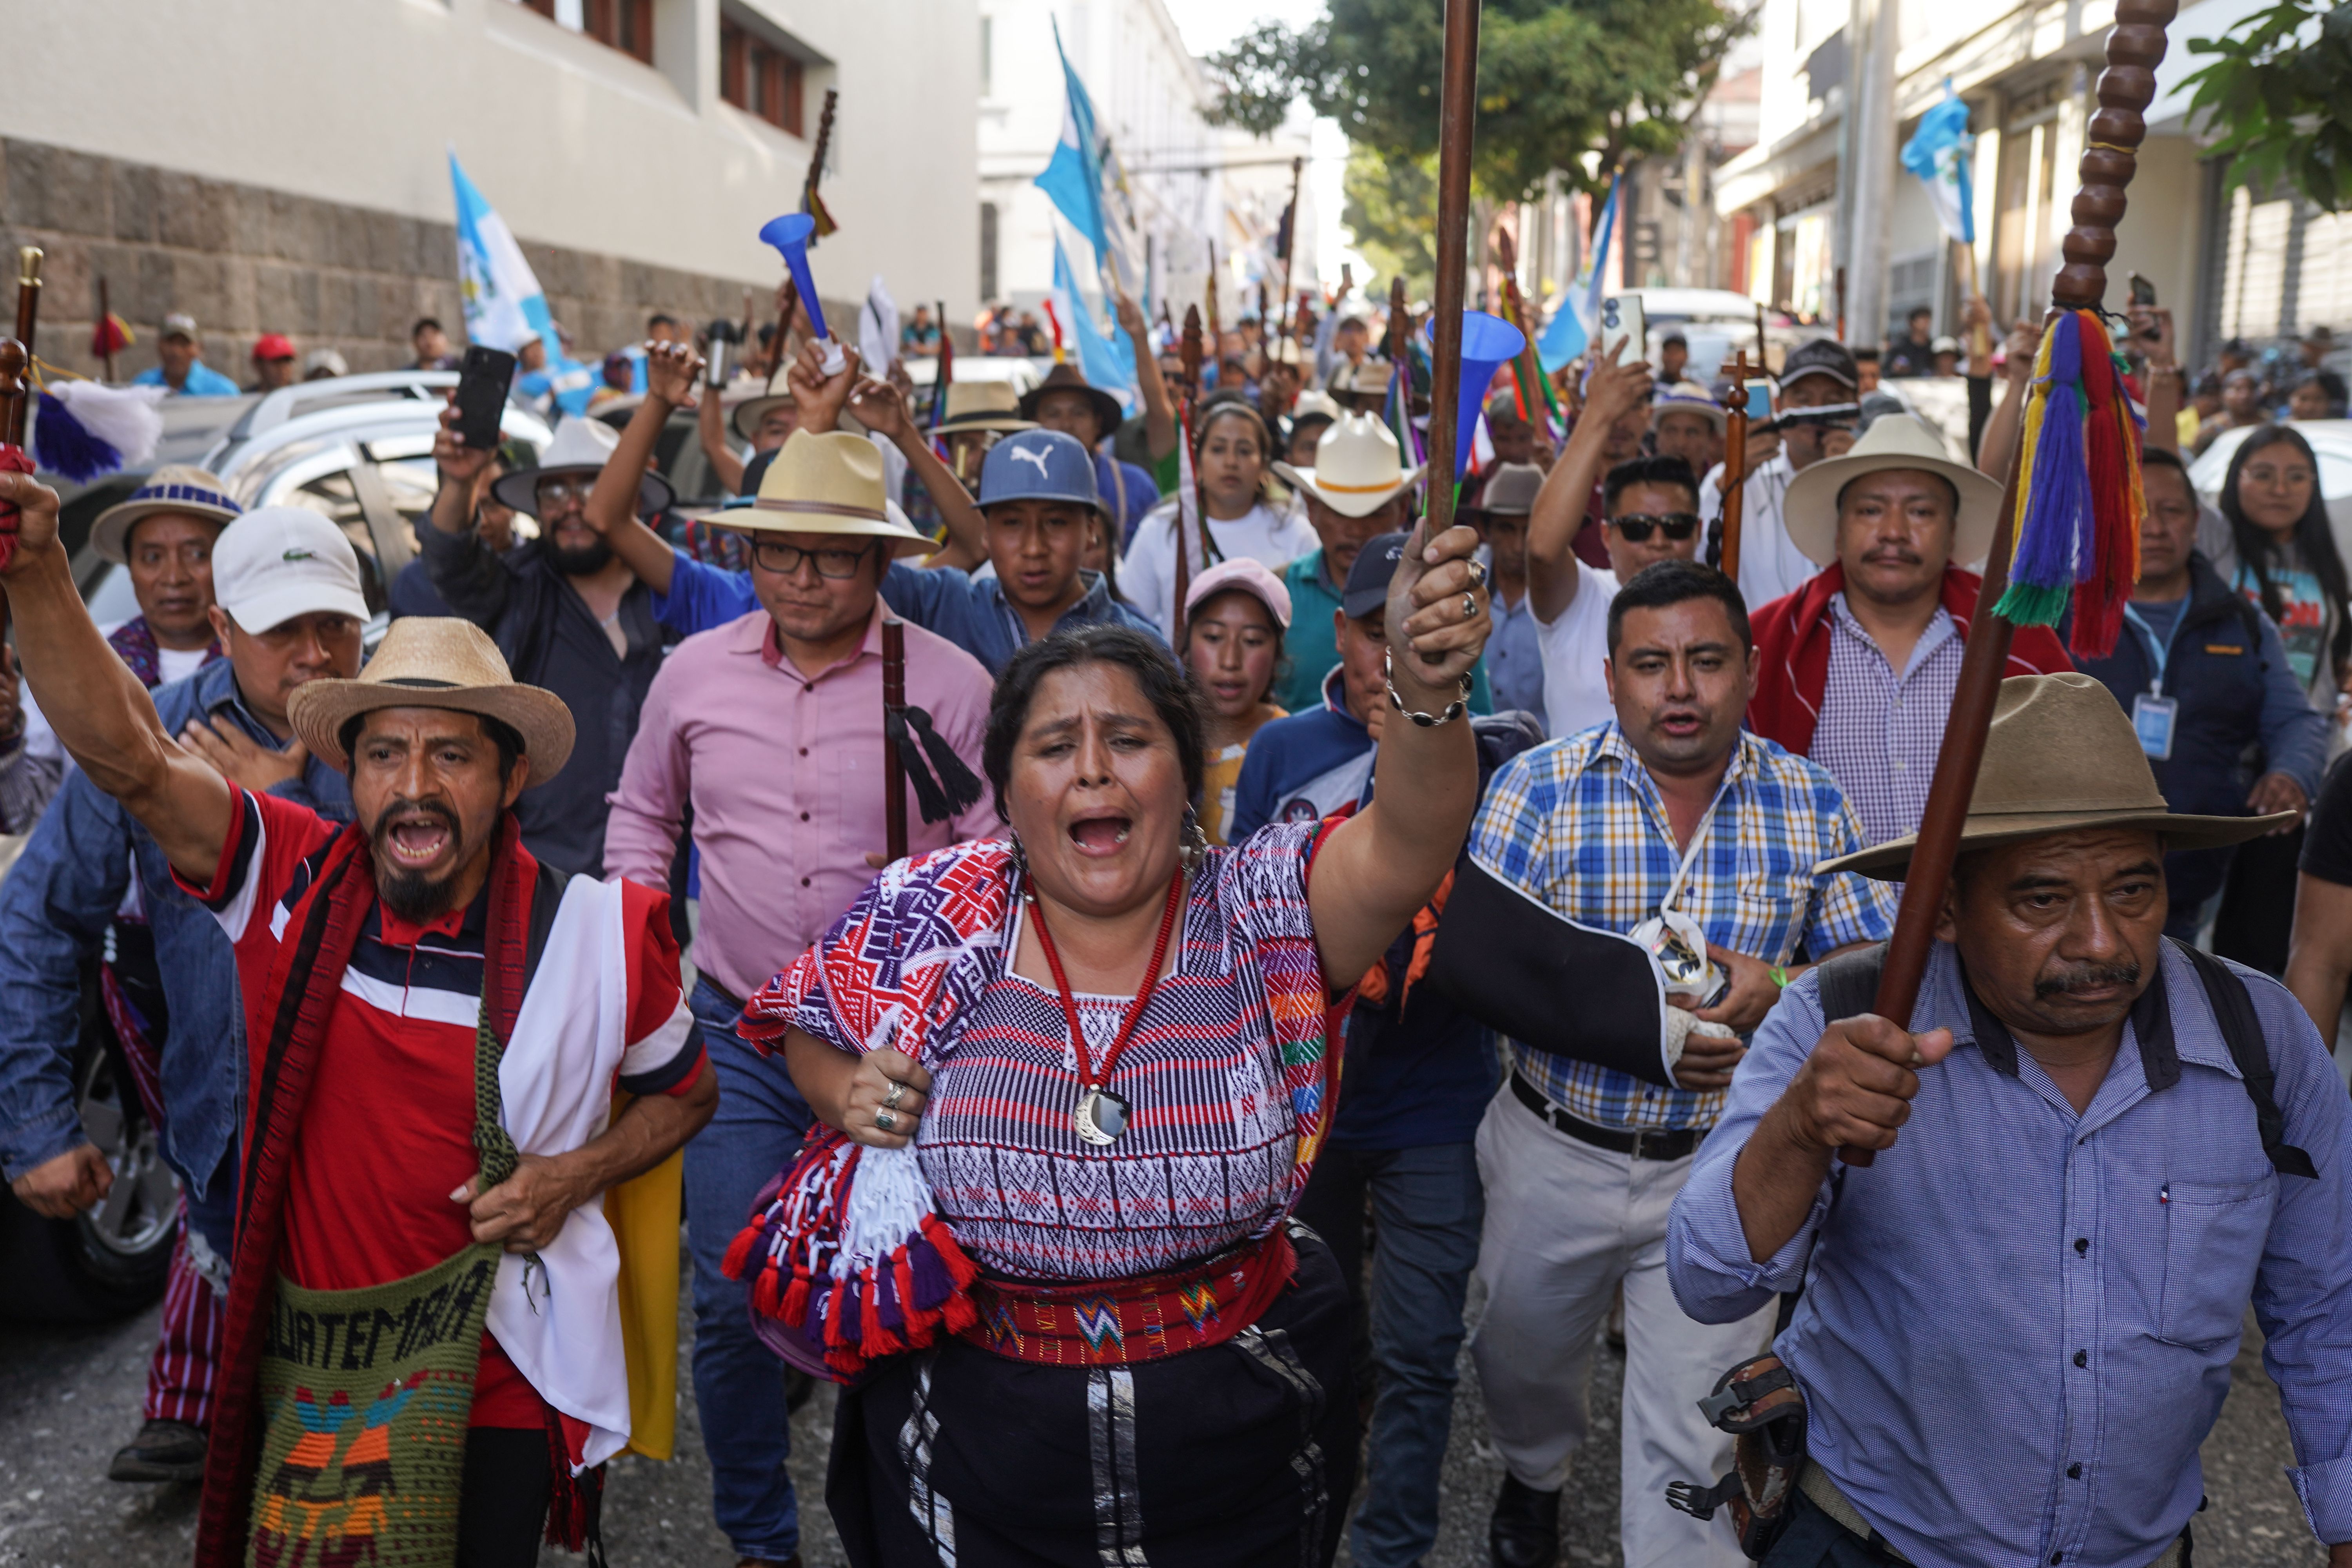 Several people march in a street protesting in Guatemala City during the delays of new President Bernardo Arévalo's inauguration